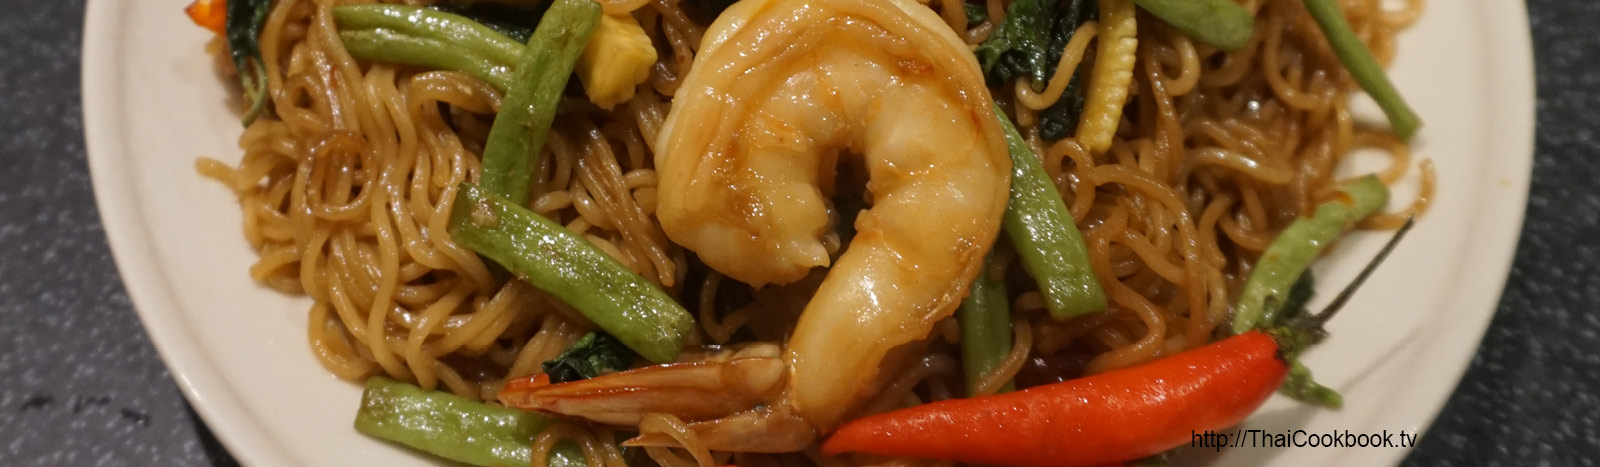 Authentic Thai recipe for Spicy Fried Noodles with Shrimp